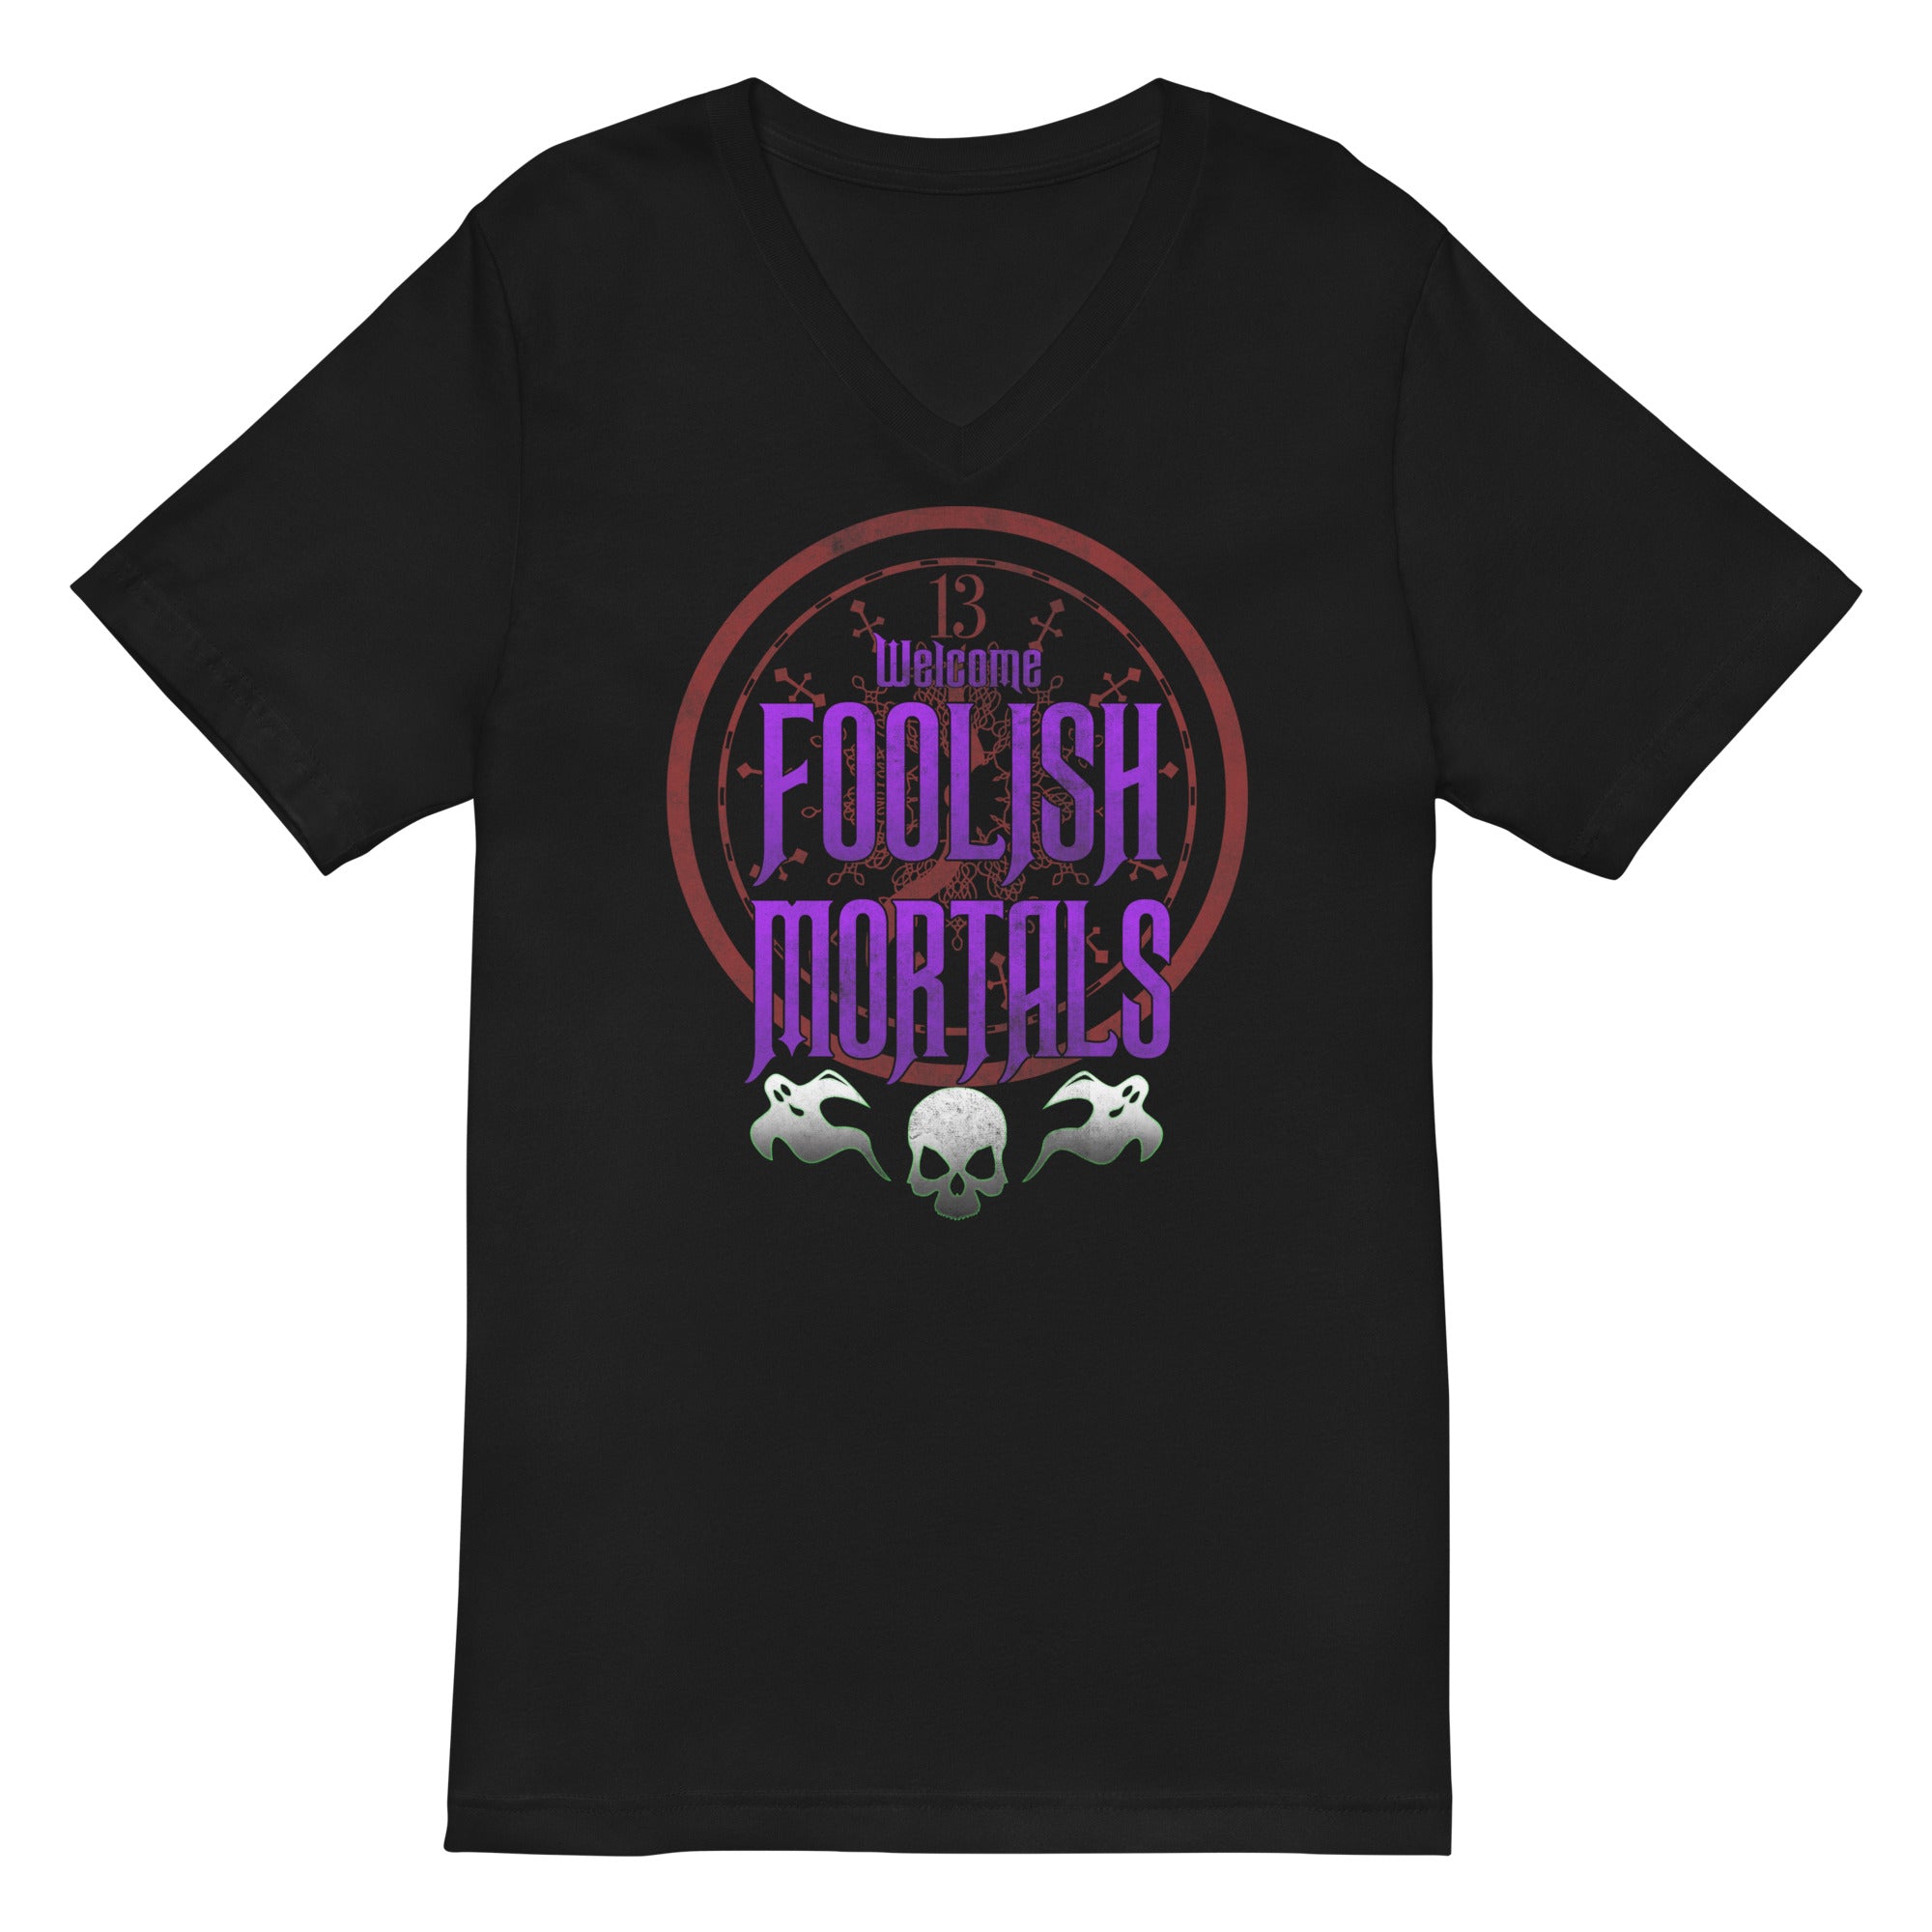 Welcome Foolish Mortals Haunted Mansion Women’s Short Sleeve V-Neck T-Shirt - Edge of Life Designs